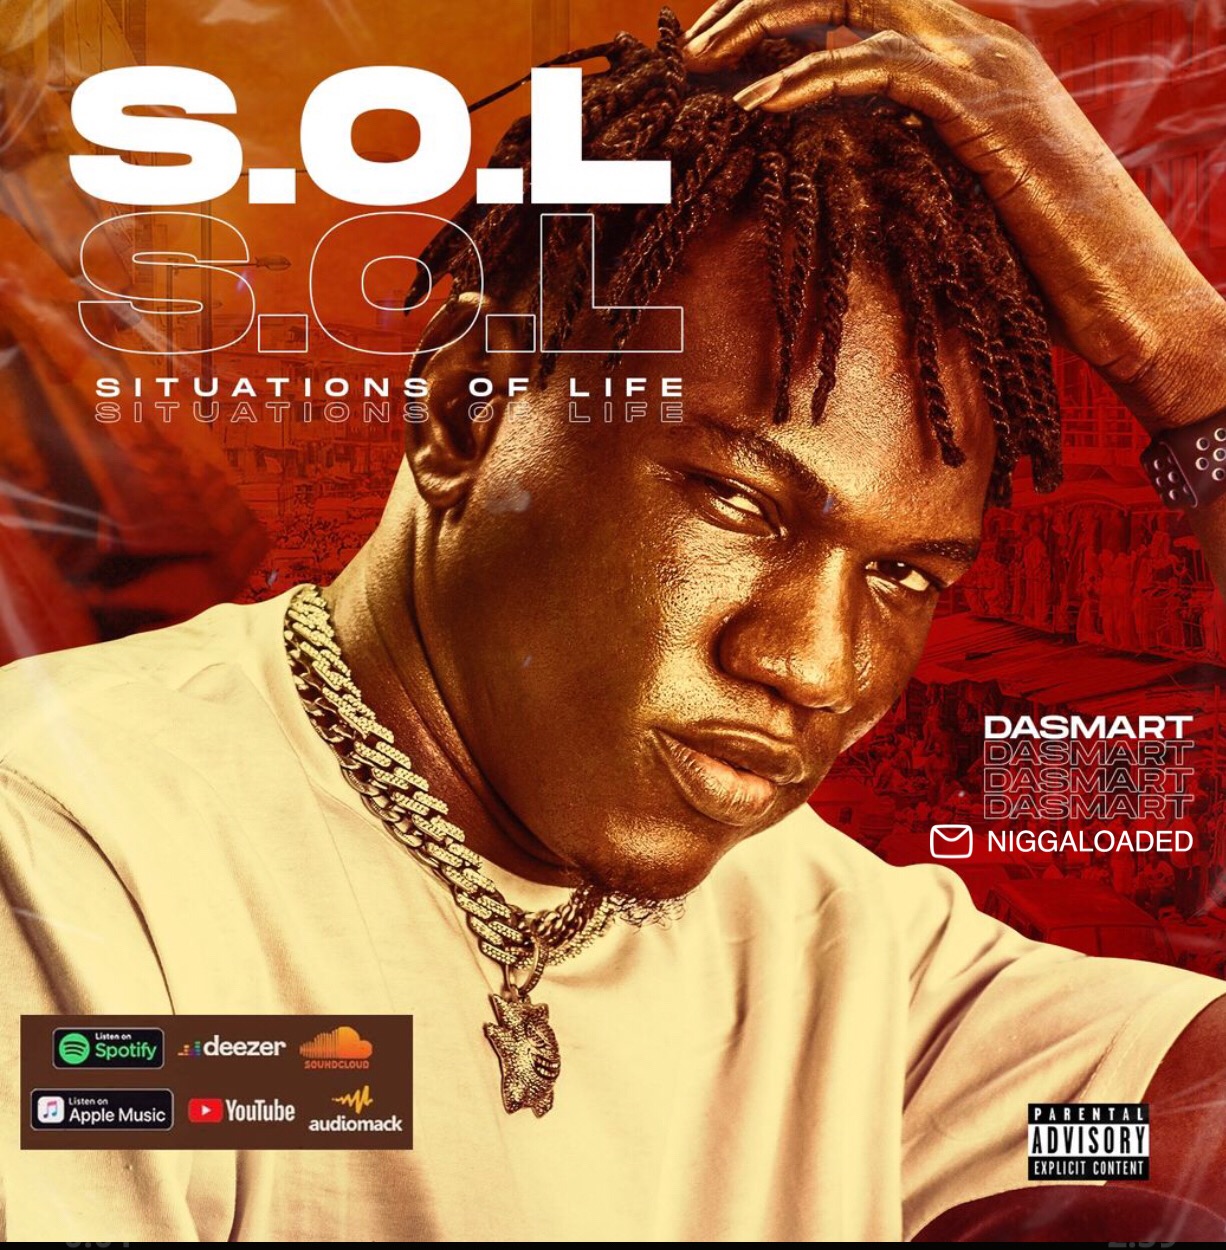 Dasmart - SOL (Situation Of Life)